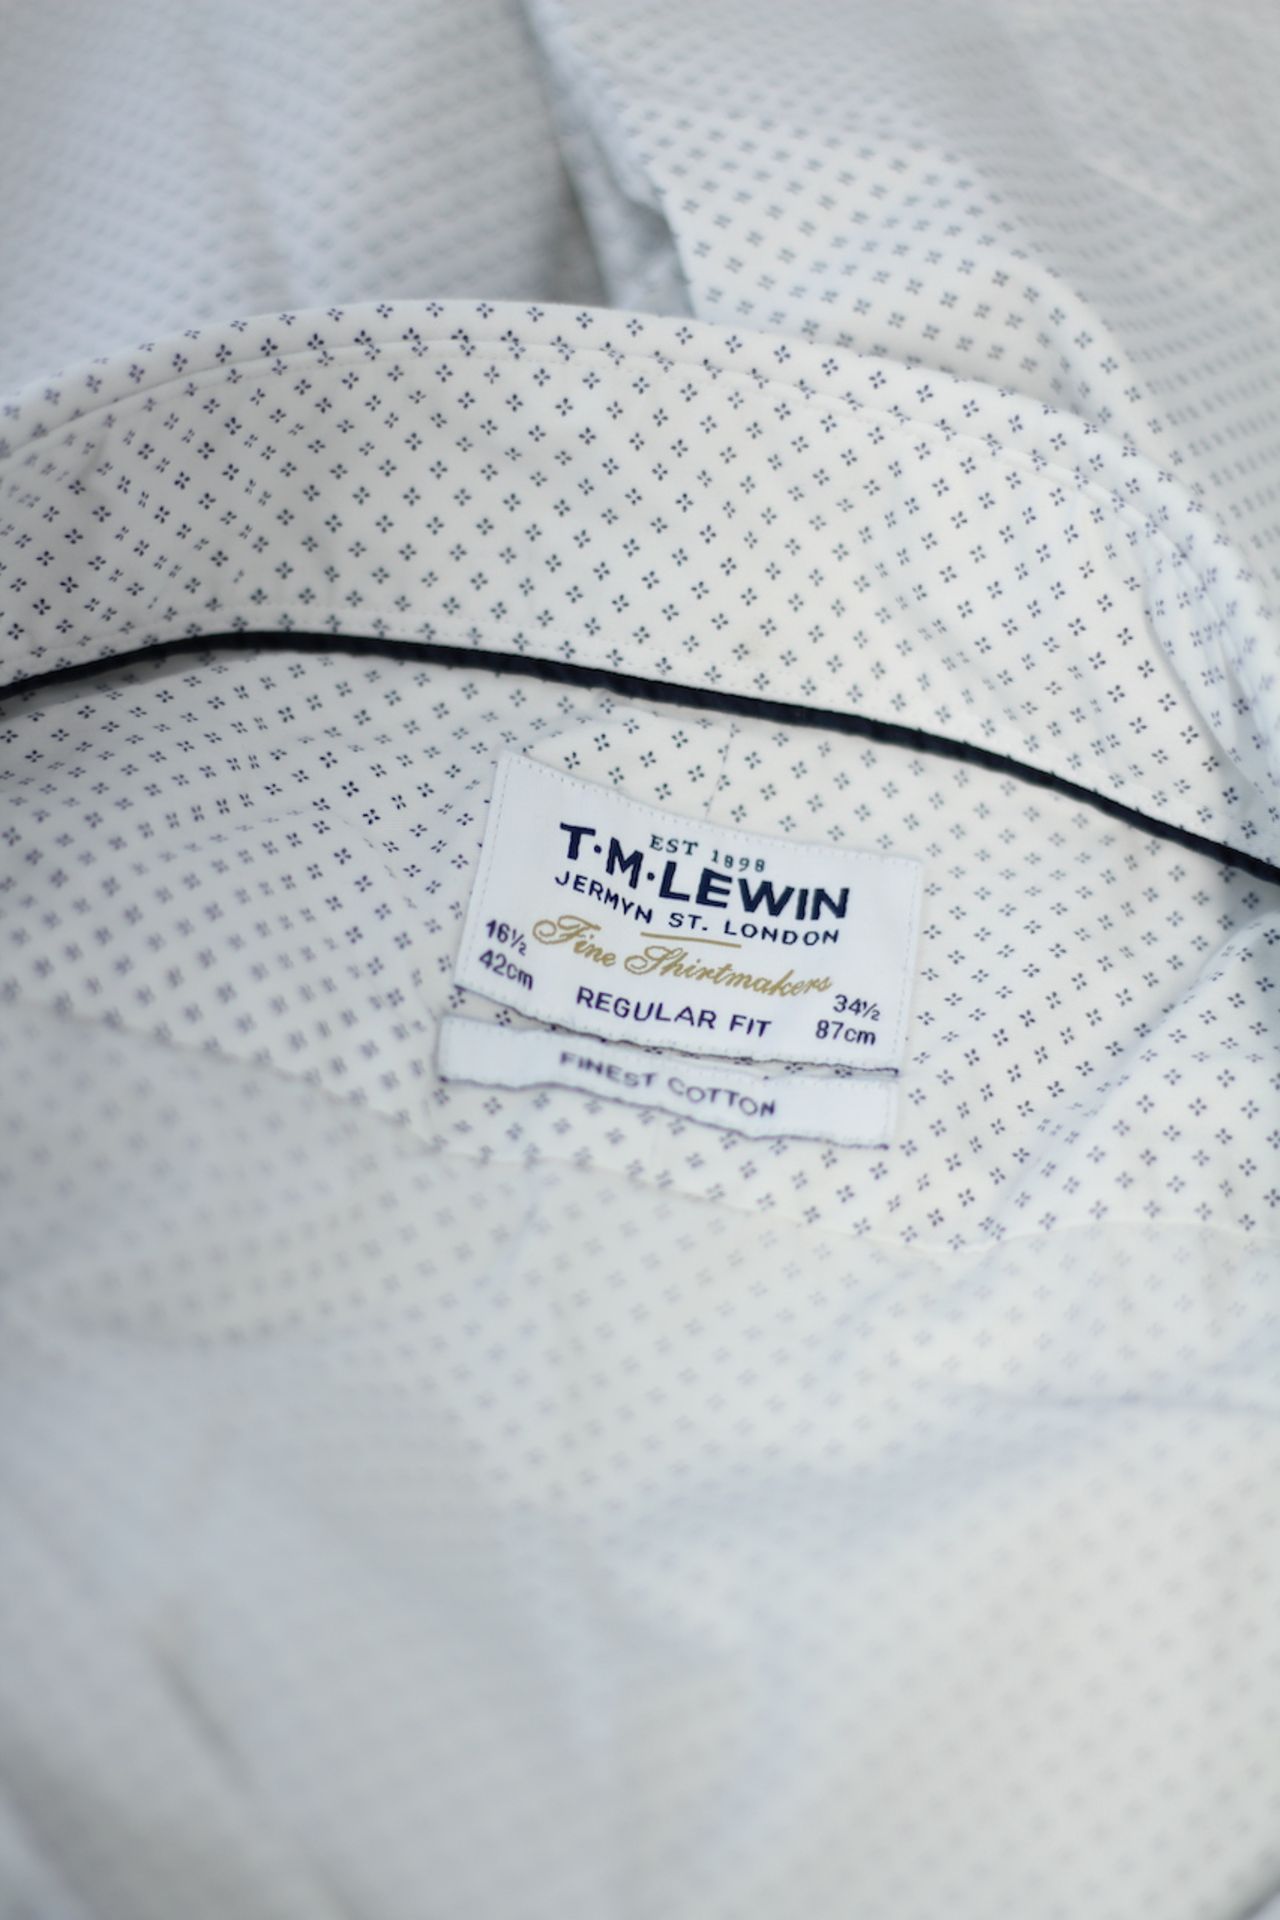 T.M. LEWIN PATTERNED SHIRT, Colour : WHITE, AGE: UNKNOWN, SIZE: 16 1/2, CONDITION GRADE: 2 GOOD * TO - Image 2 of 2